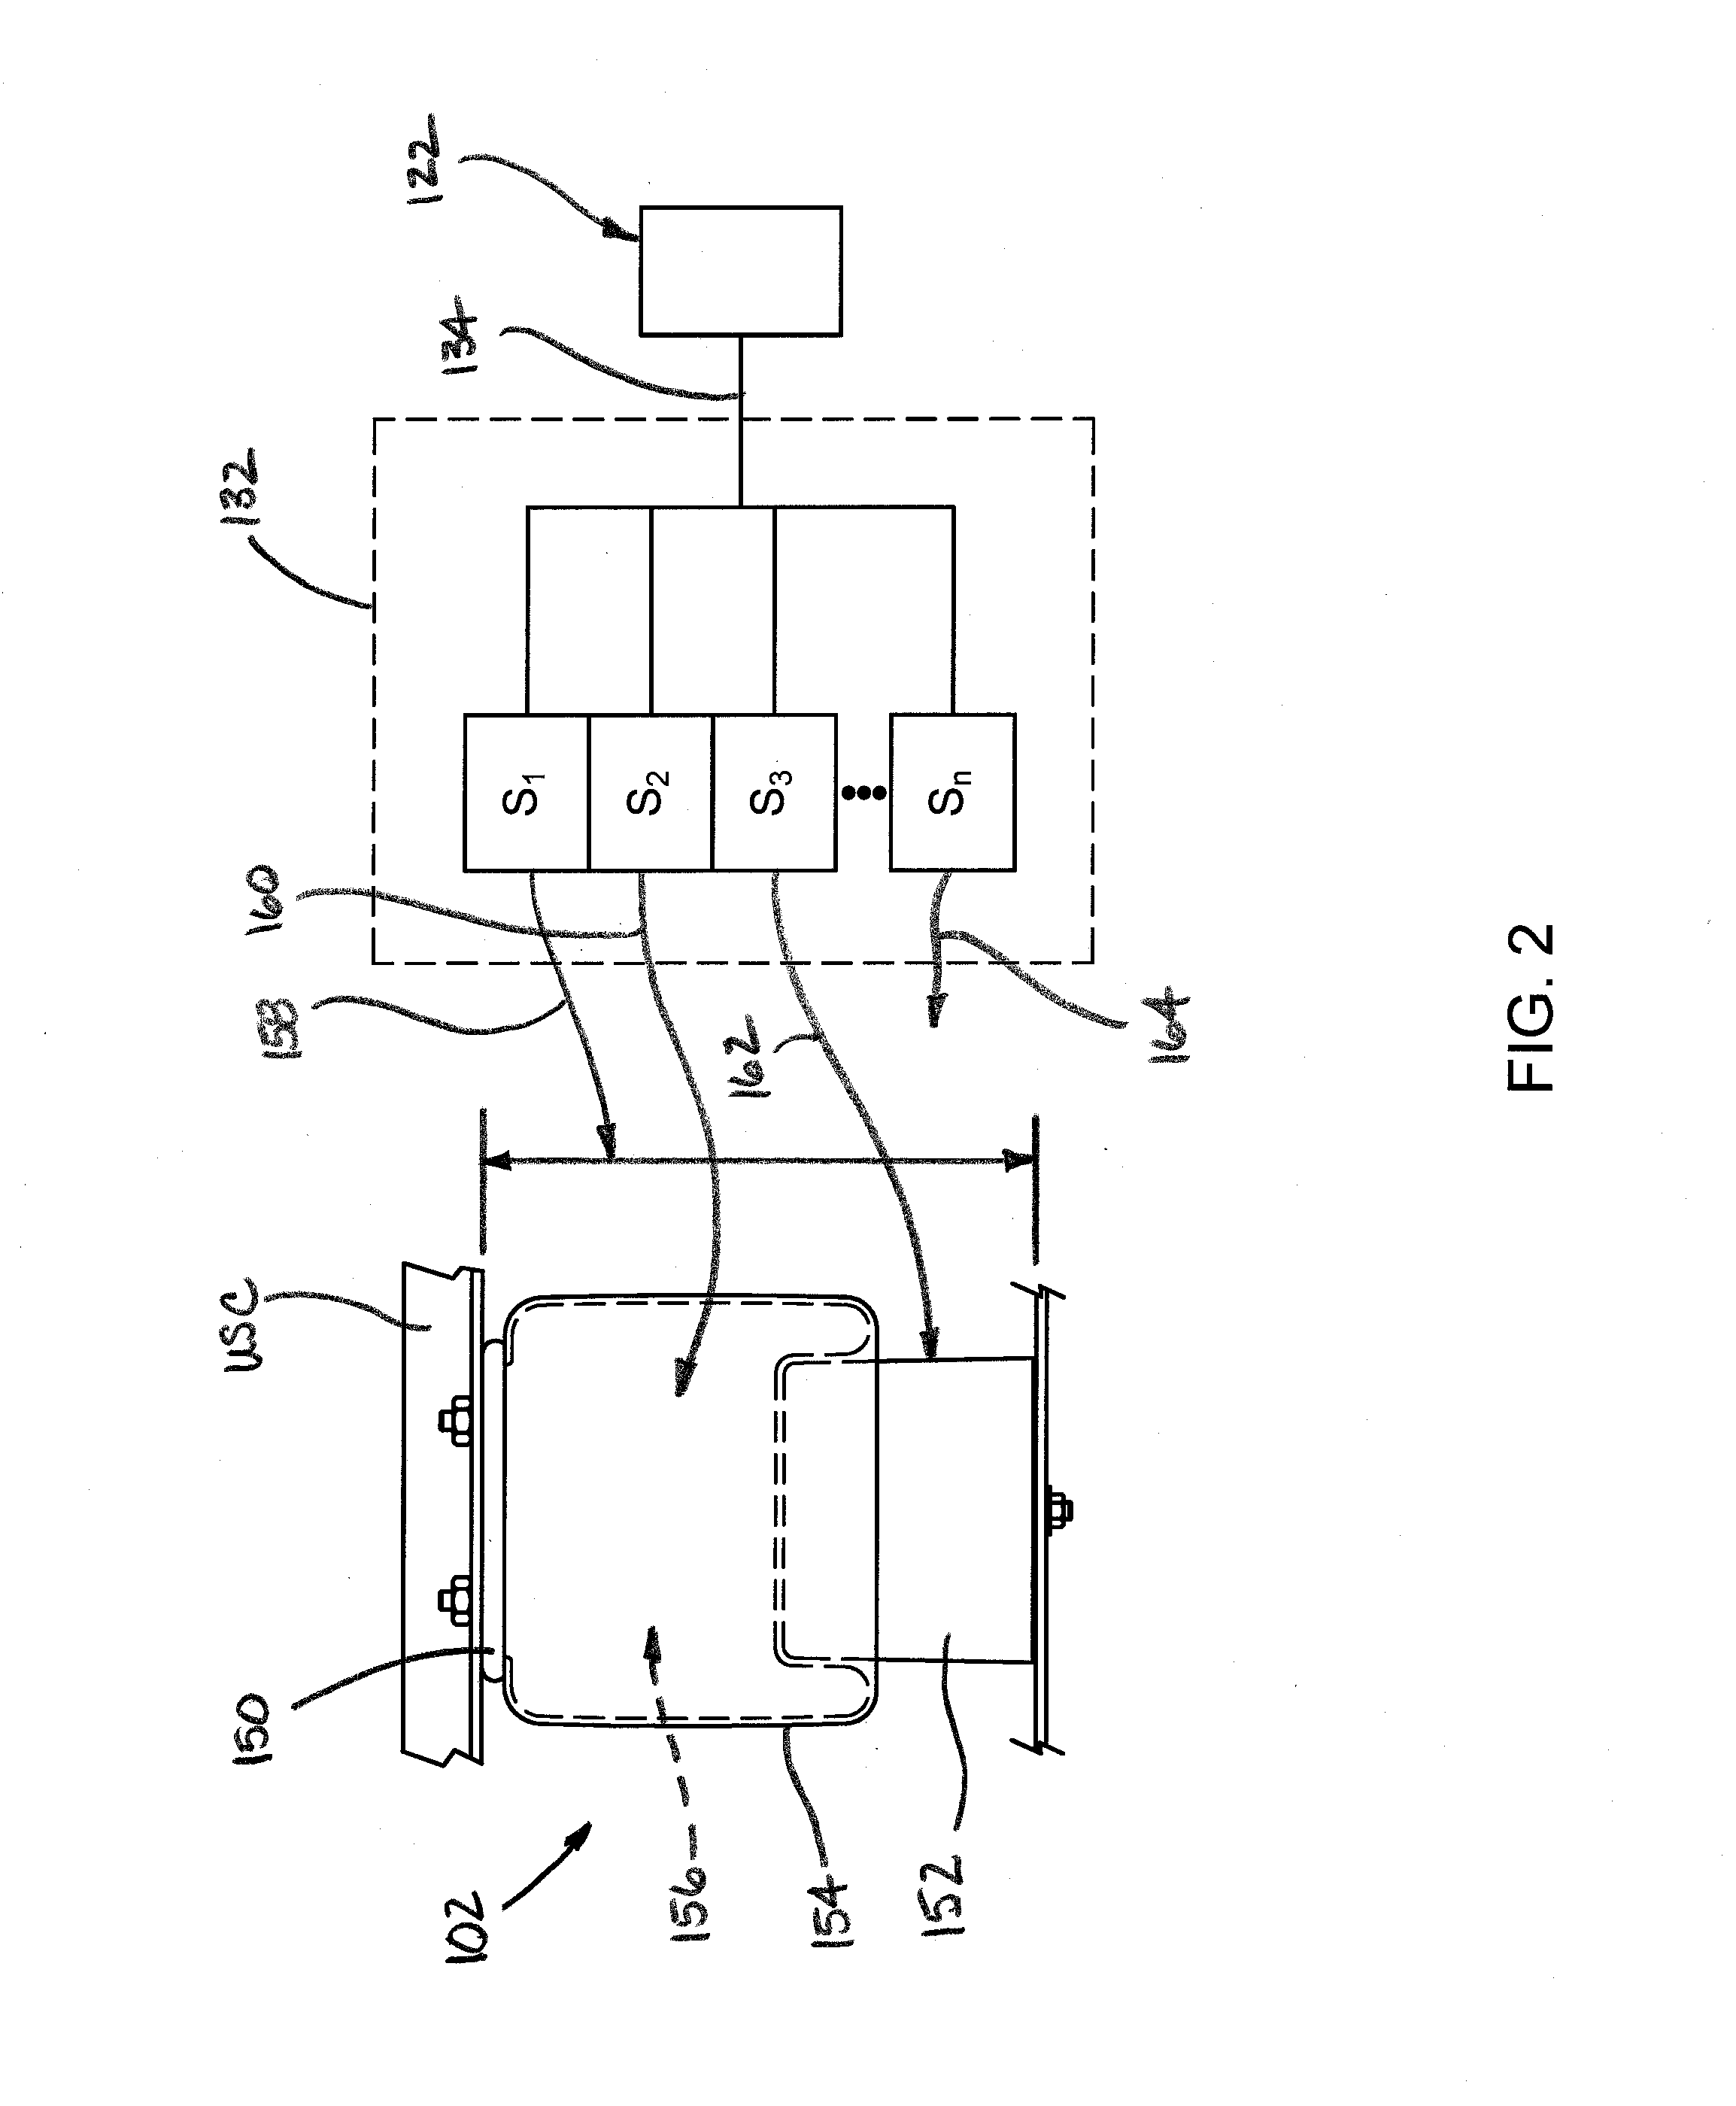 Indicator of estimated spring life as well as gas spring assembly, system and method